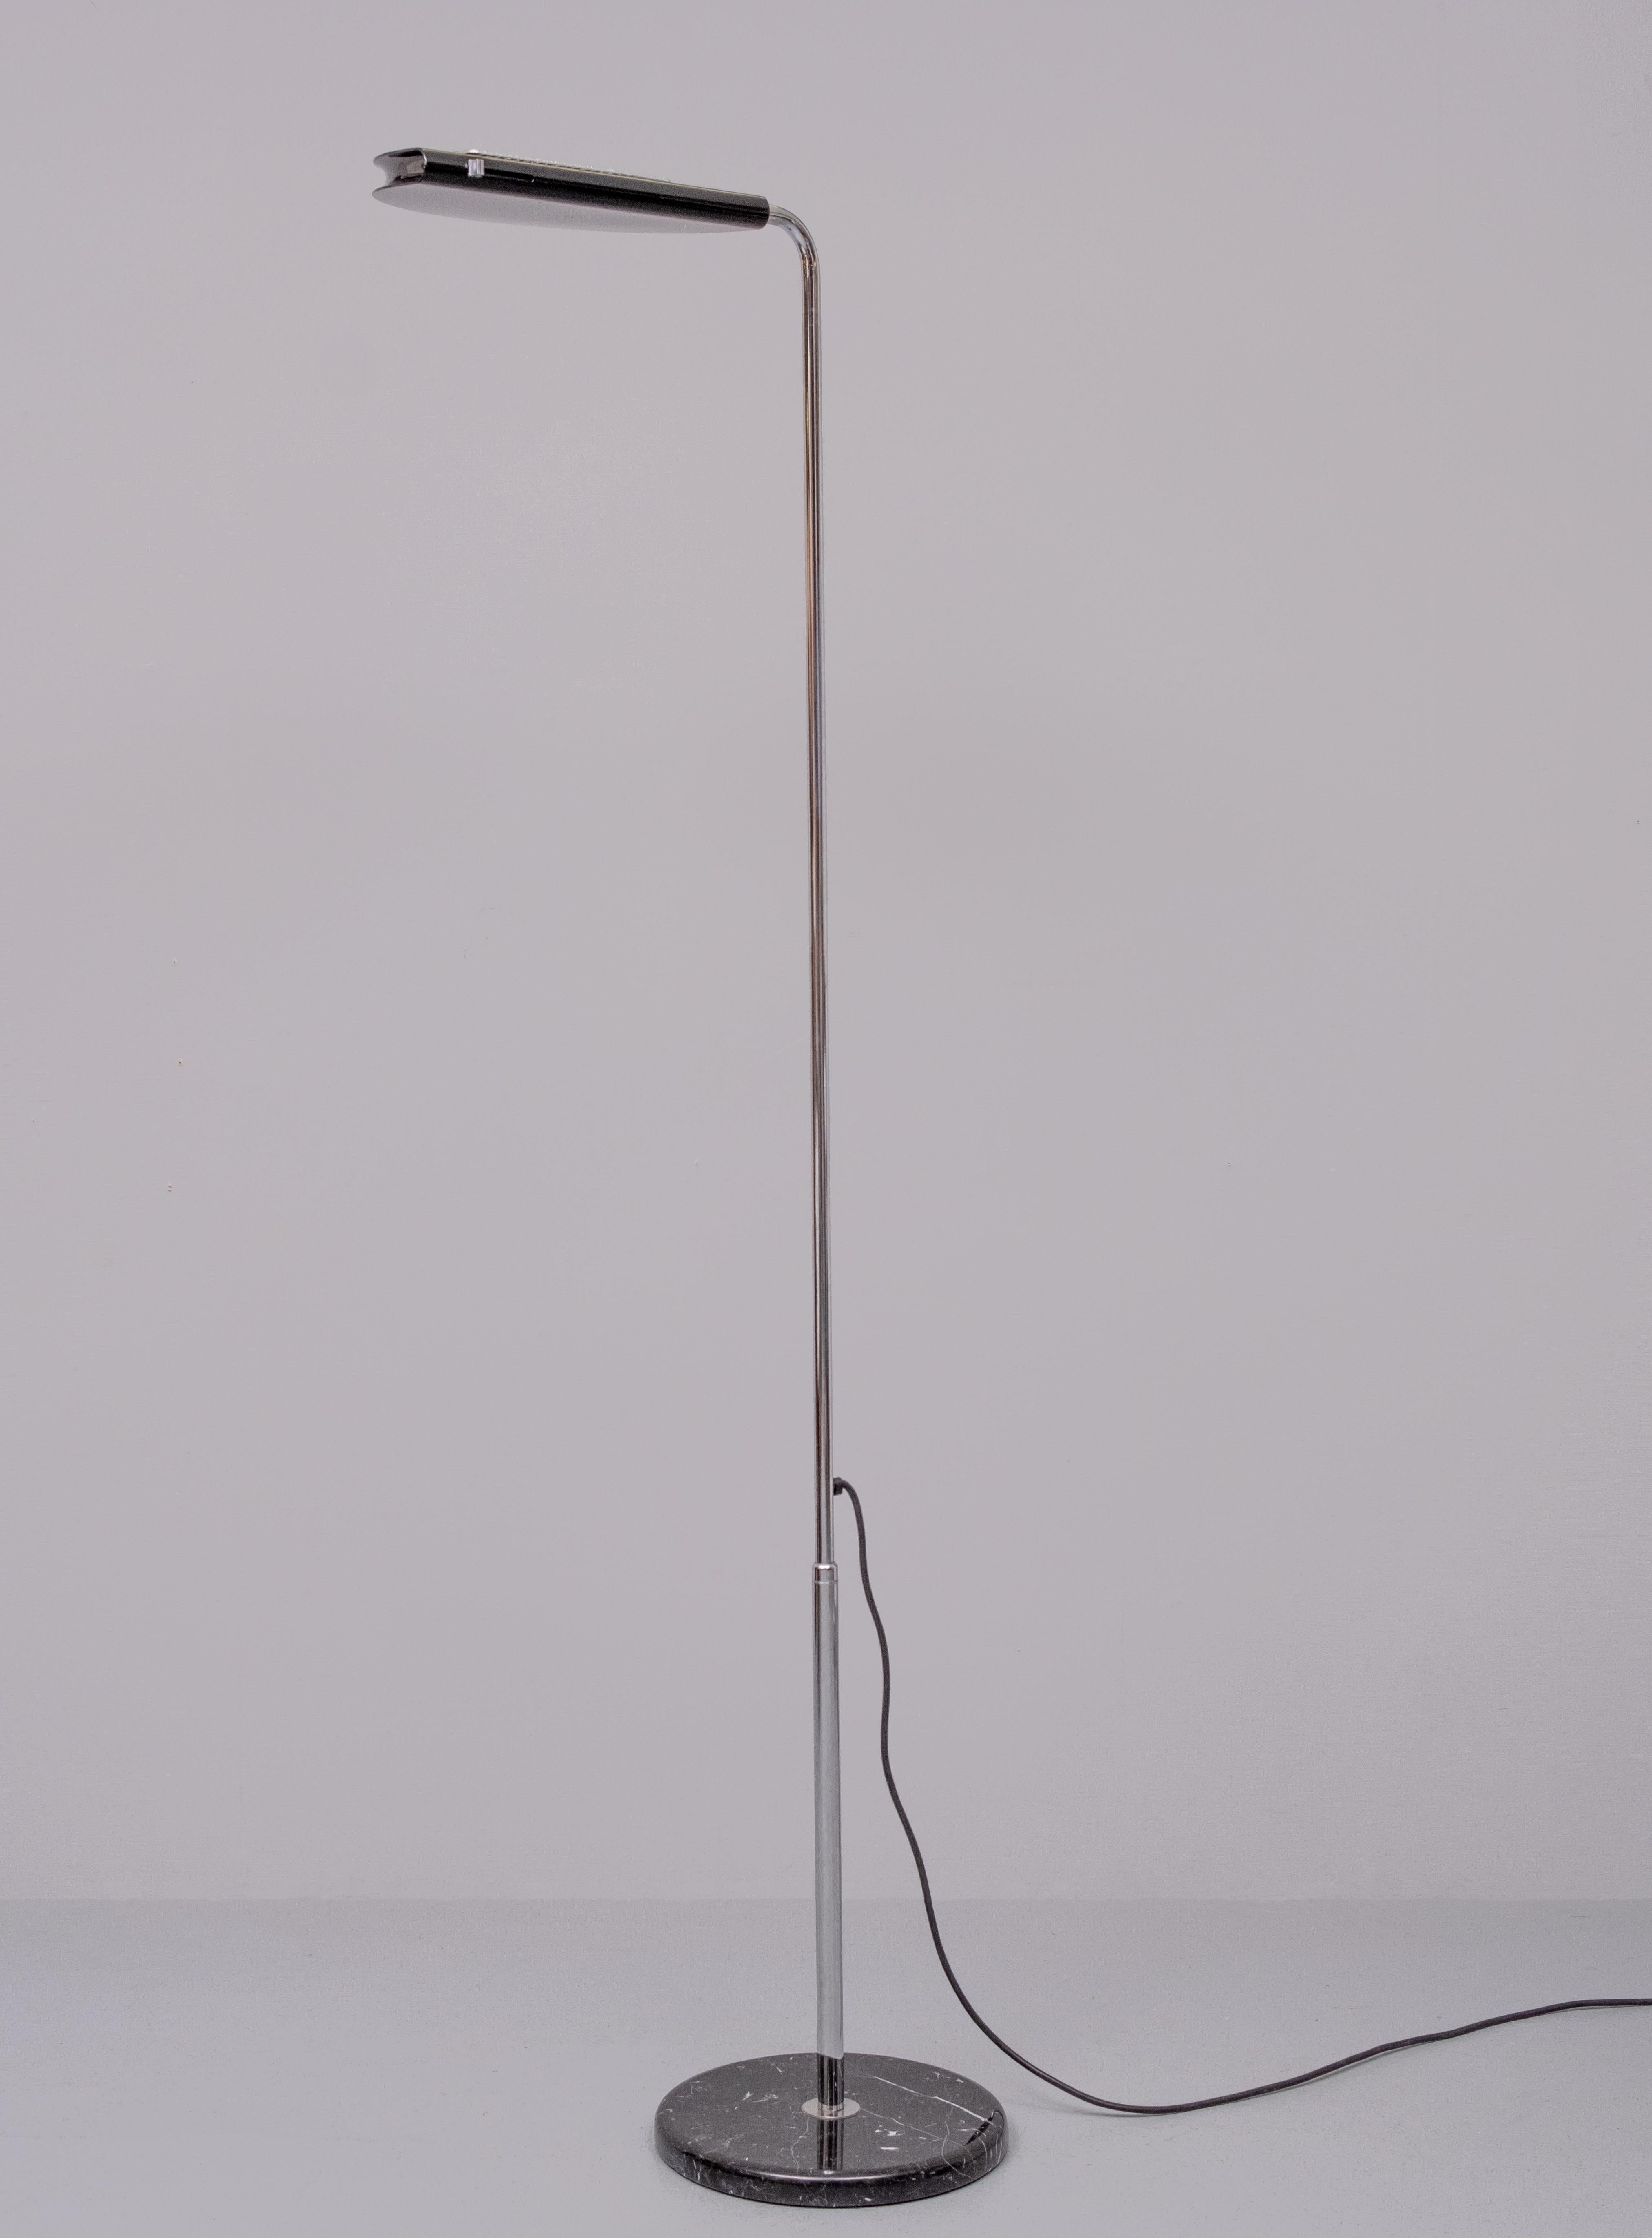 This beathiful Italian floor lamp, model Mezzaluna, was designed by Bruno Gecchelin in 1974 and produced by Skipper. The floor lamp has a tubular chrome-plated steel structure, a Black marble base and an adjustable black enameled head. Dimmable